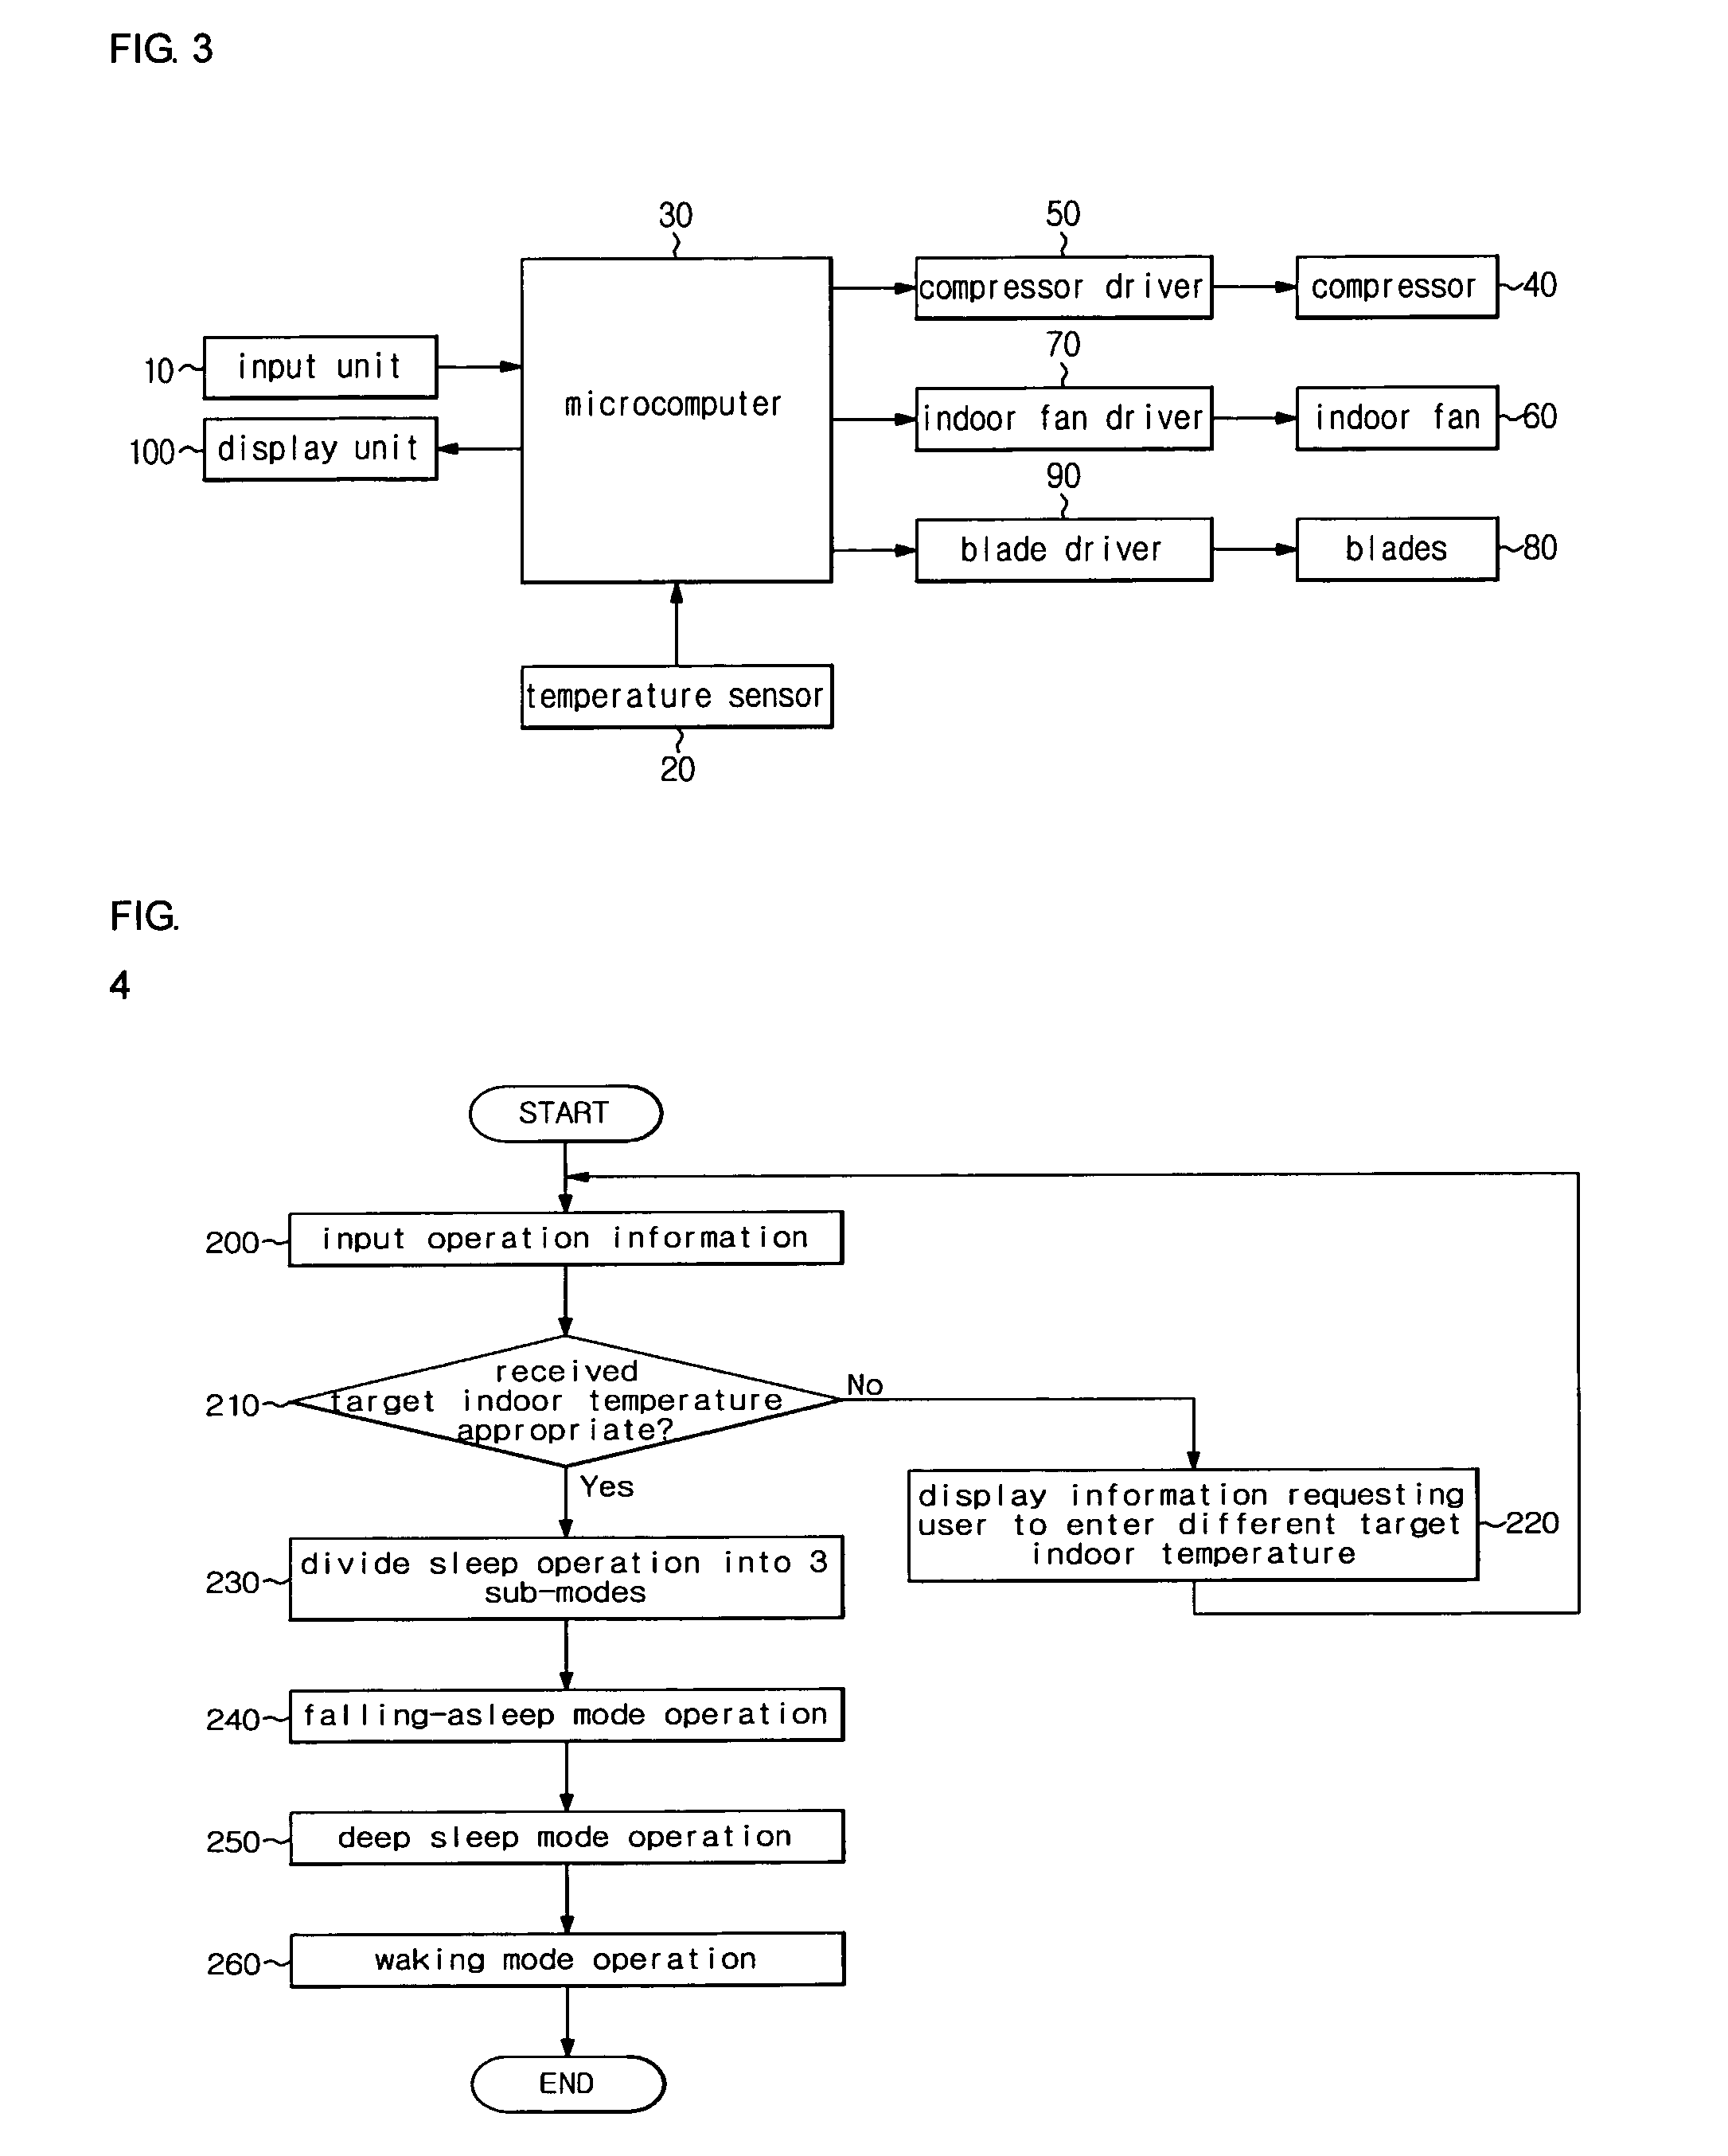 Method to control sleep operation of air conditioner